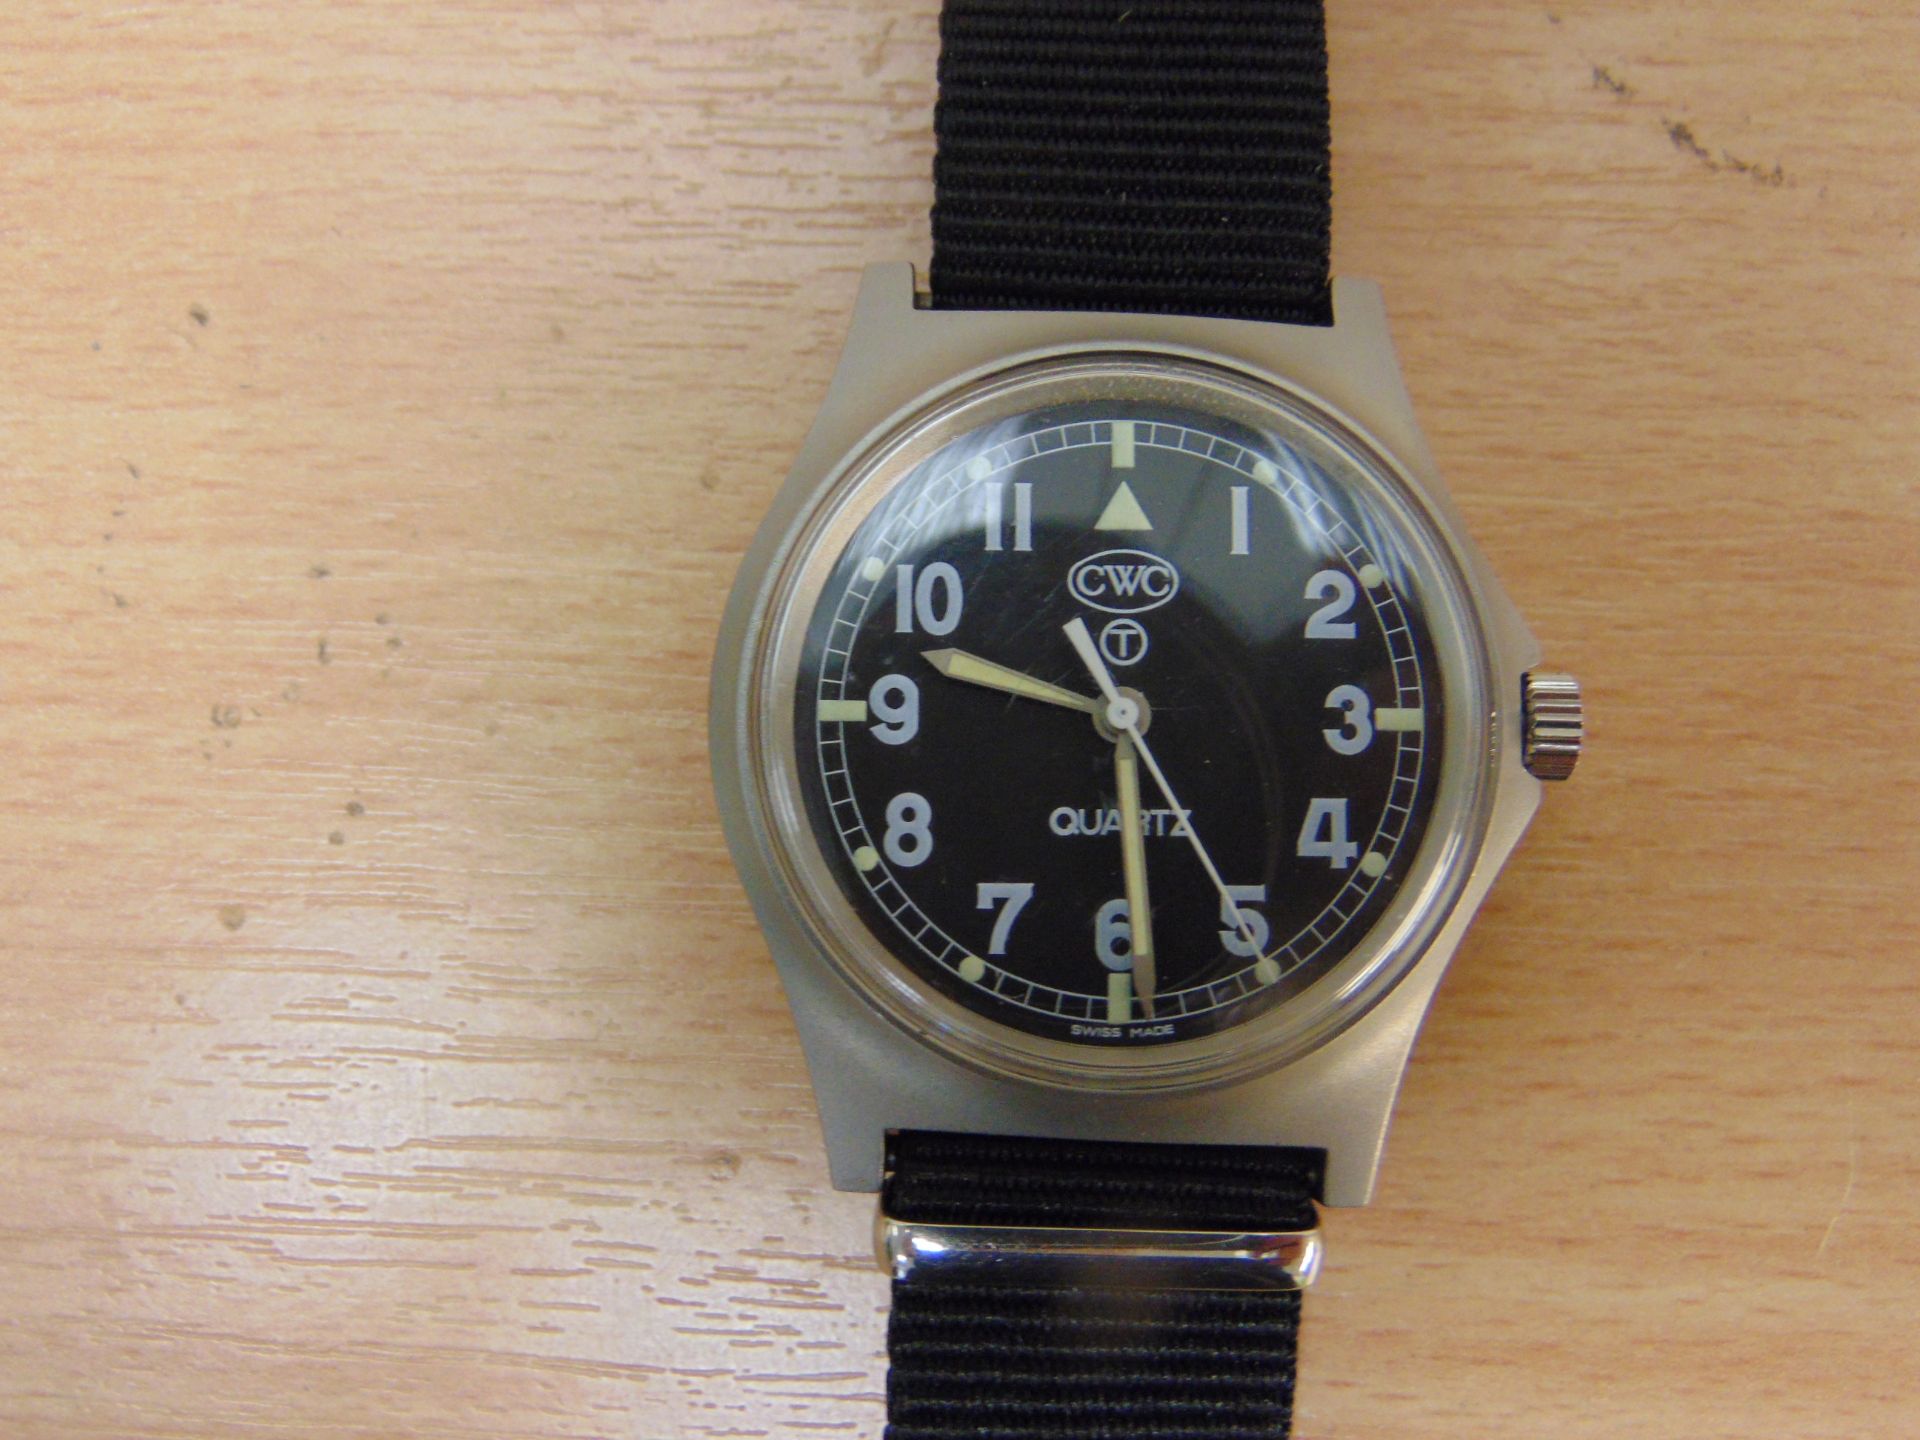 VERY RARE UNISSUED CWC 0552 ROYAL MARINES/NAVY ISSUE SERVICE WATCH, NATO MARKINGS, DATED 1990